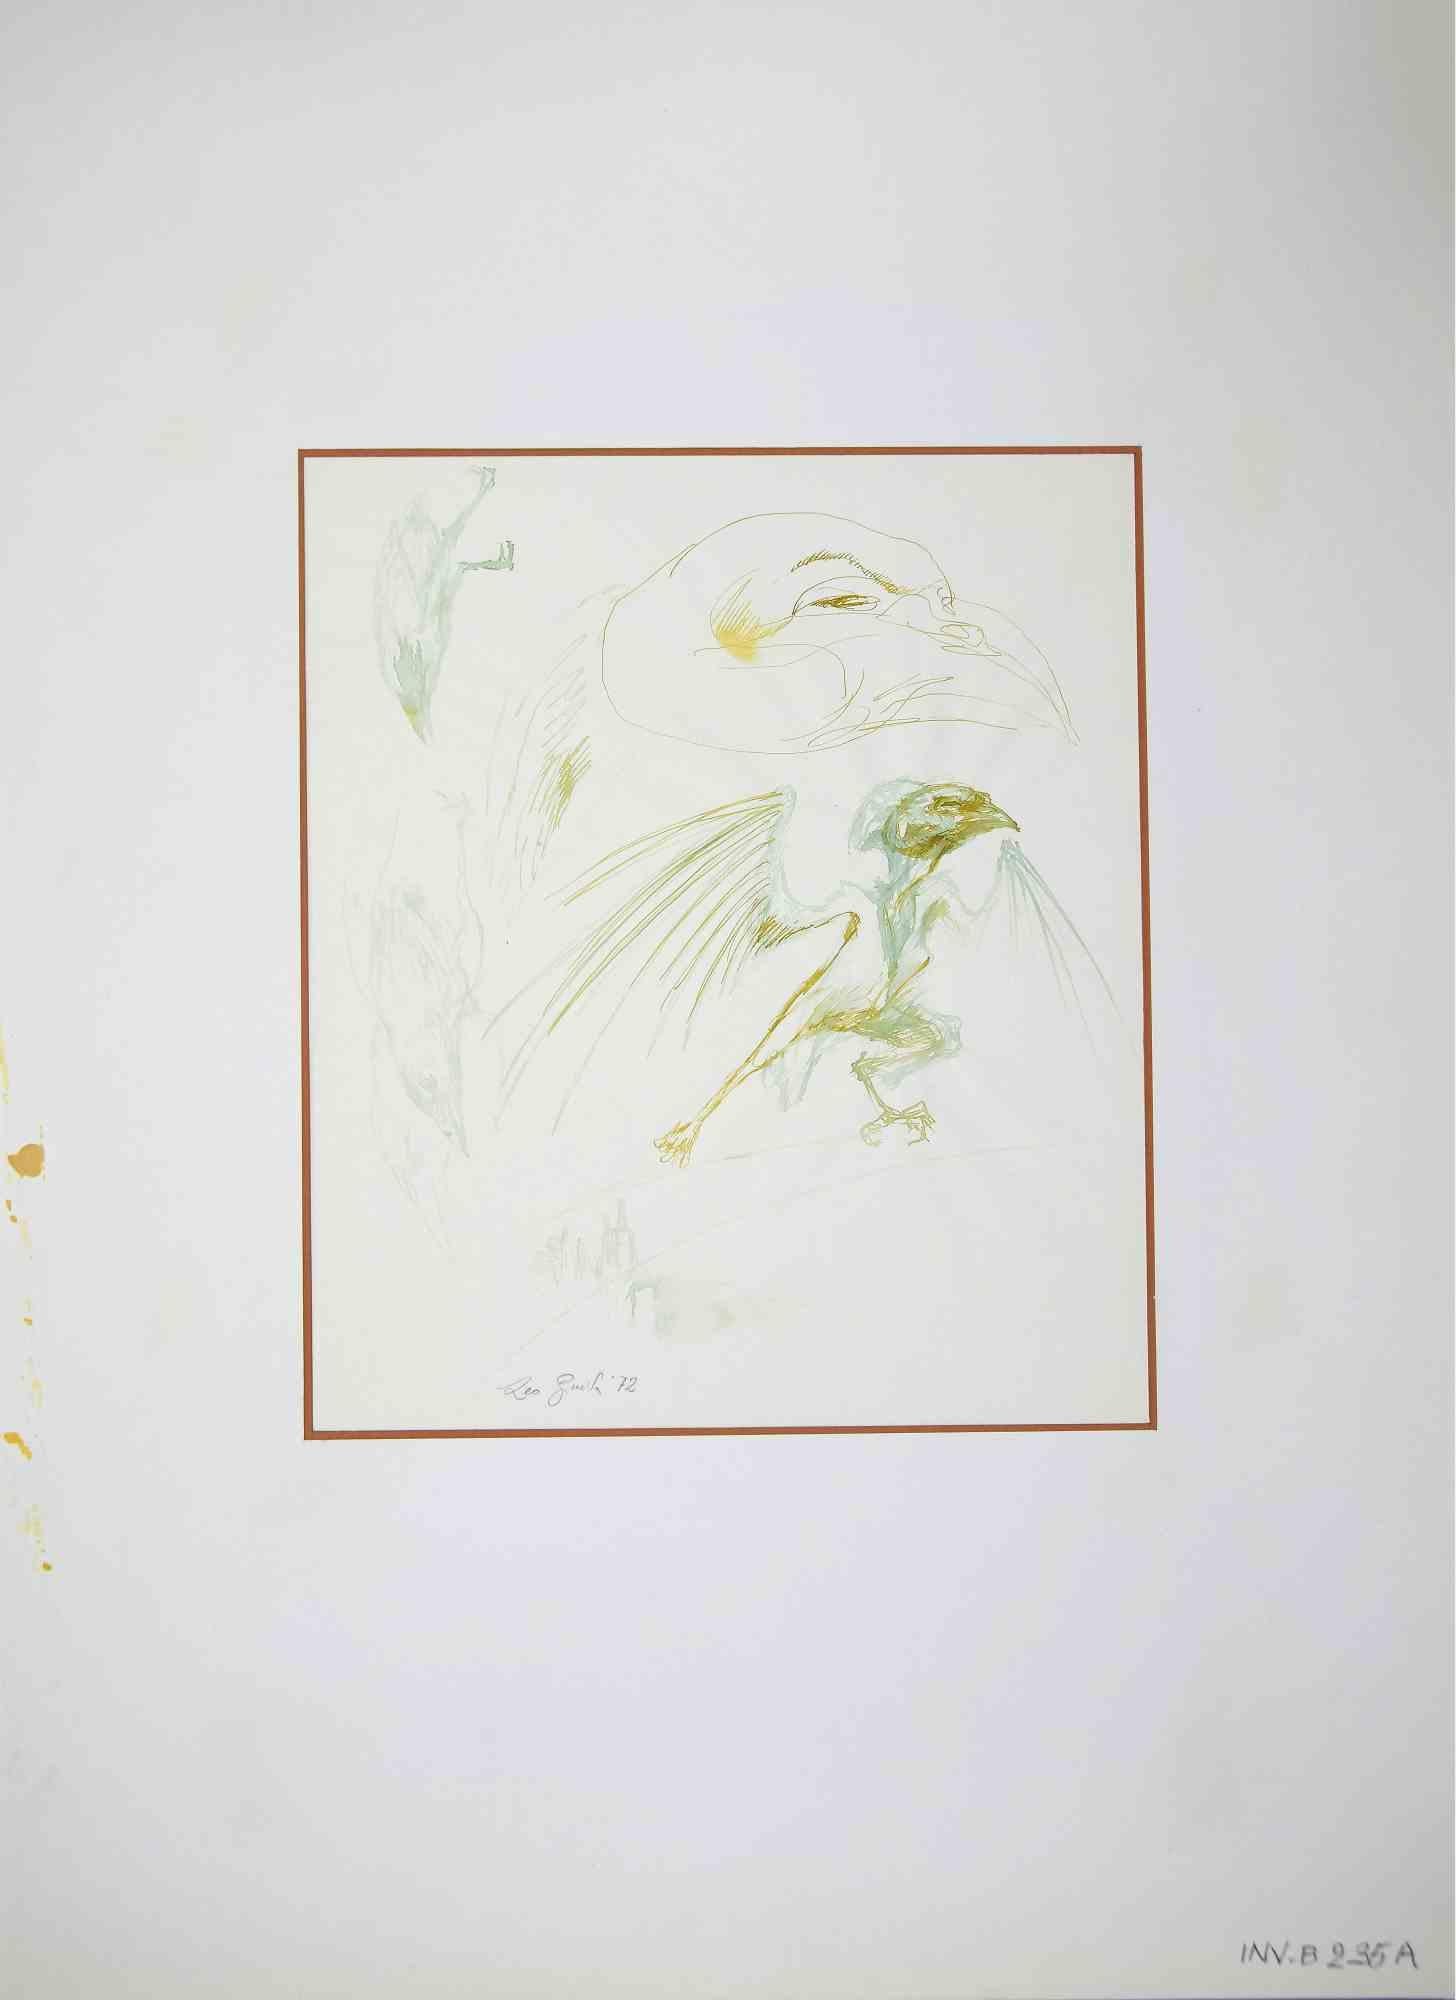 Monster Bird is an original drawing in china ink and watercolor realized by Leo Guida in 1970.

Good condition.

Leo Guida  (1992 - 2017). Sensitive to current issues, artistic movements and historical techniques, Leo Guida has been able to weave